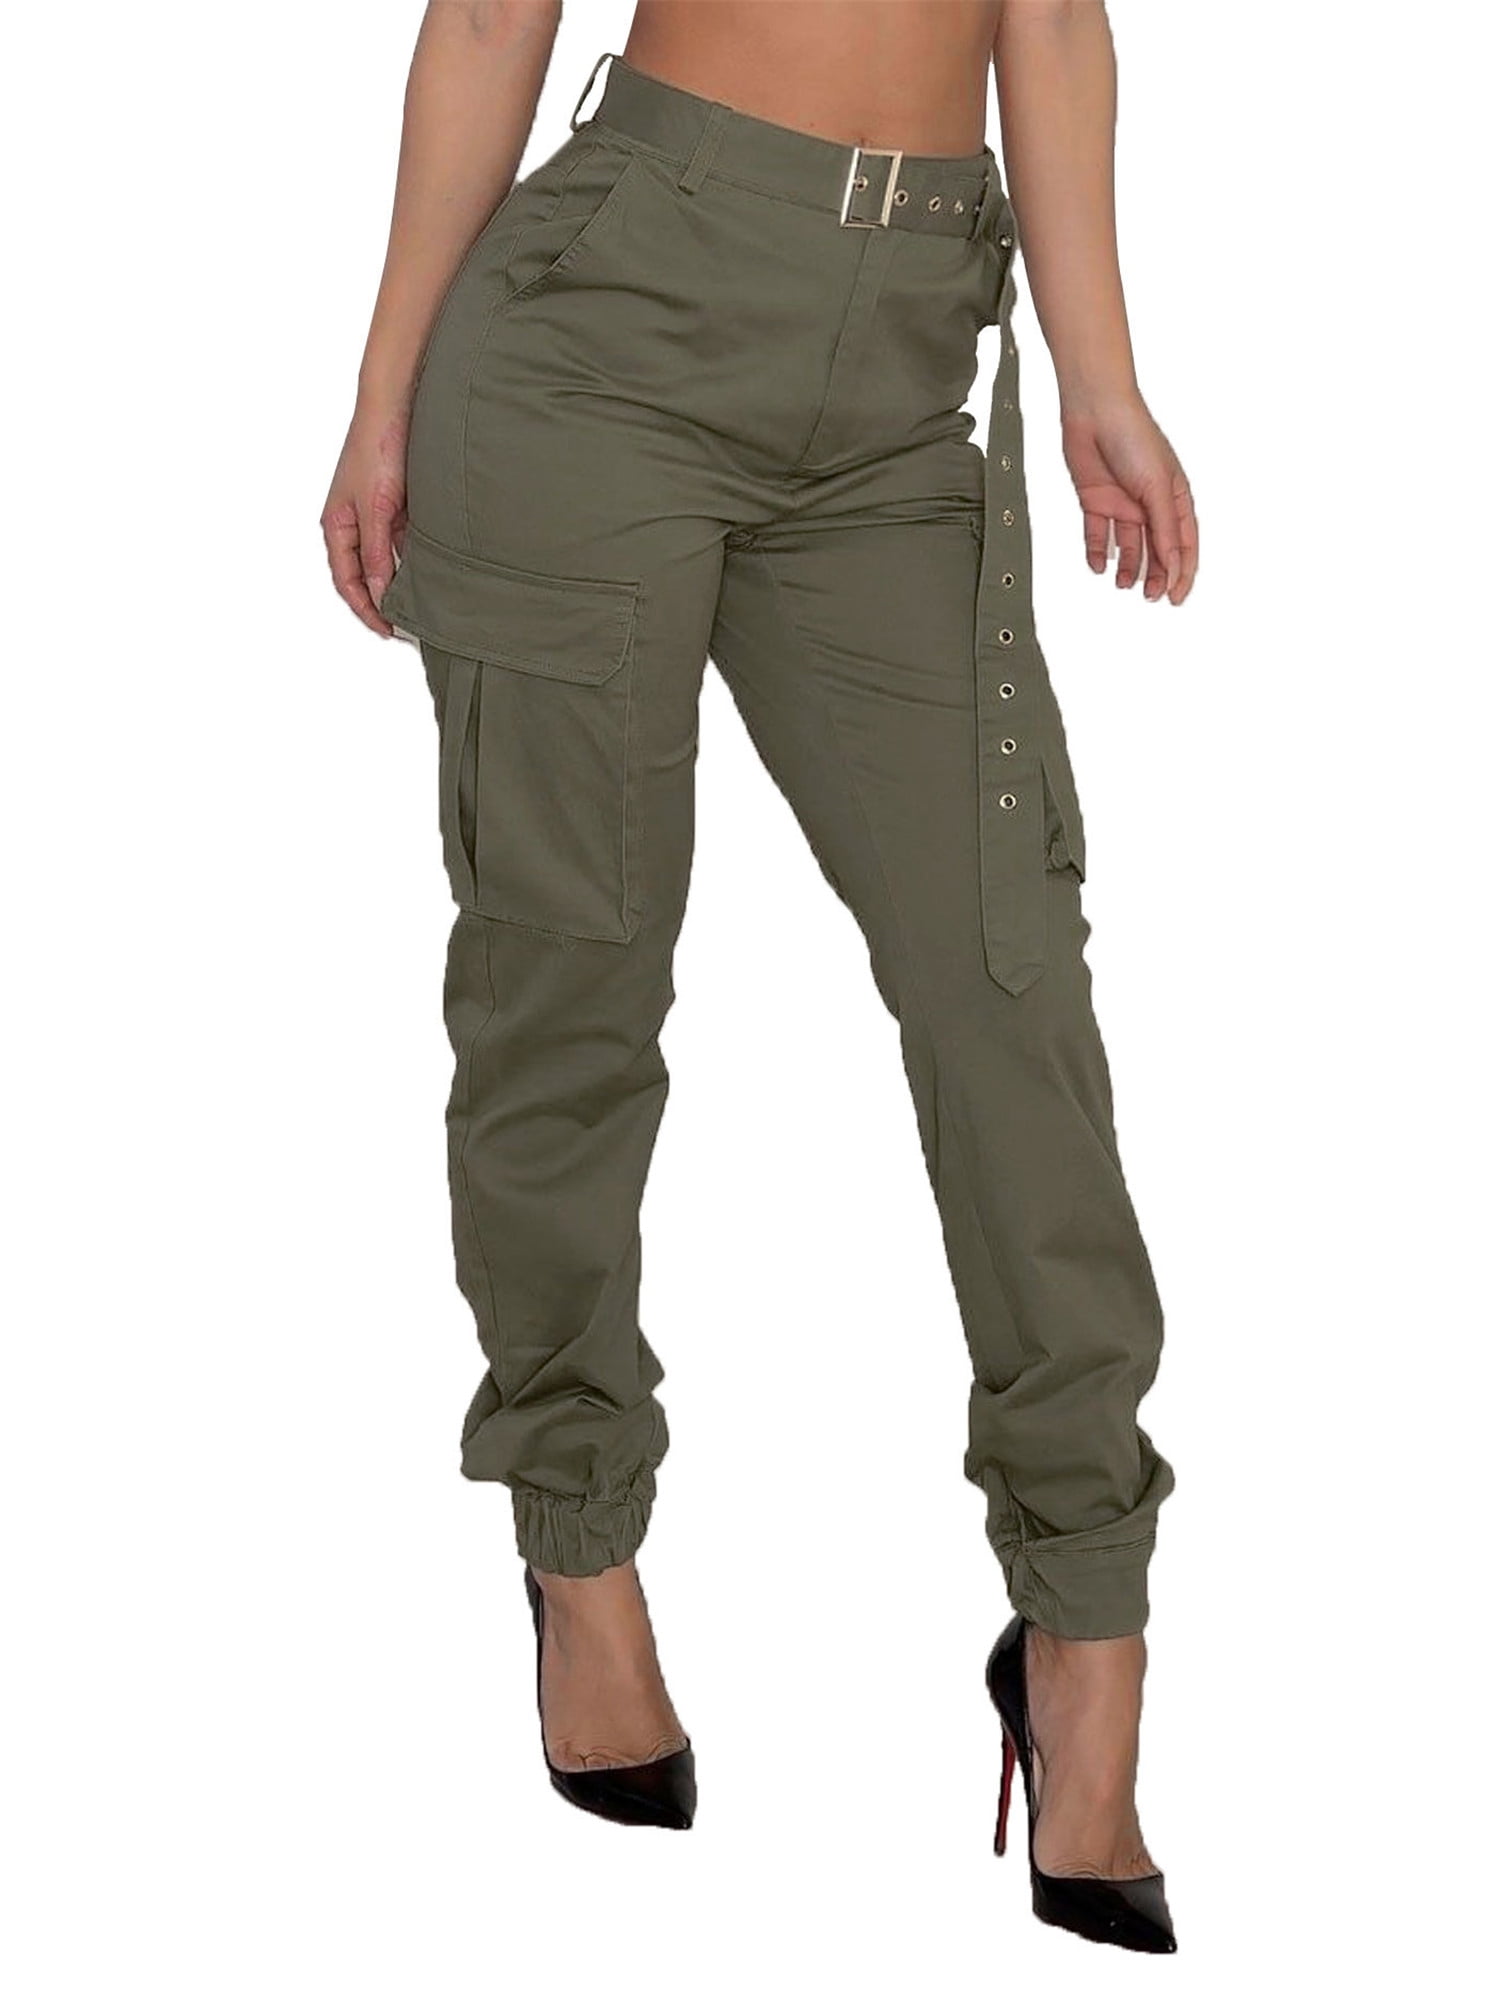 Aunavey Women's Casual Military Army Cargo Combat Work Pants with